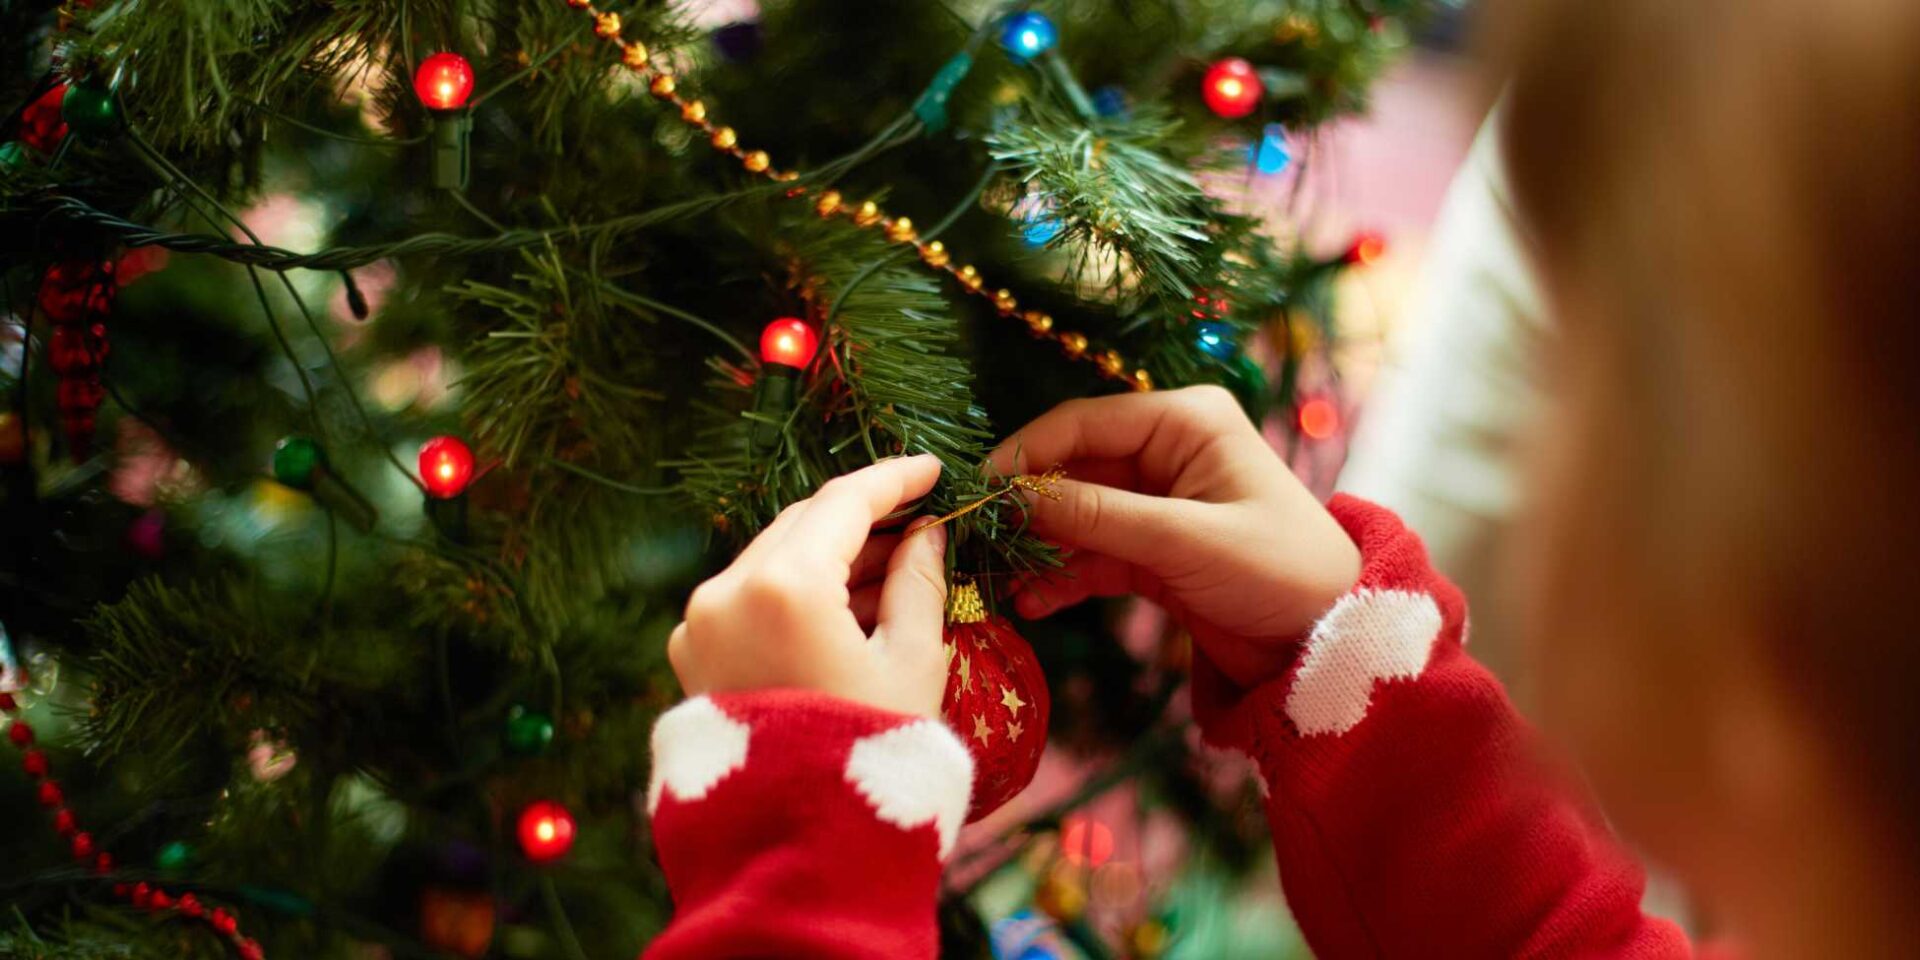 Child's hands putting decorations on a Christmas tree - Winston's Wish